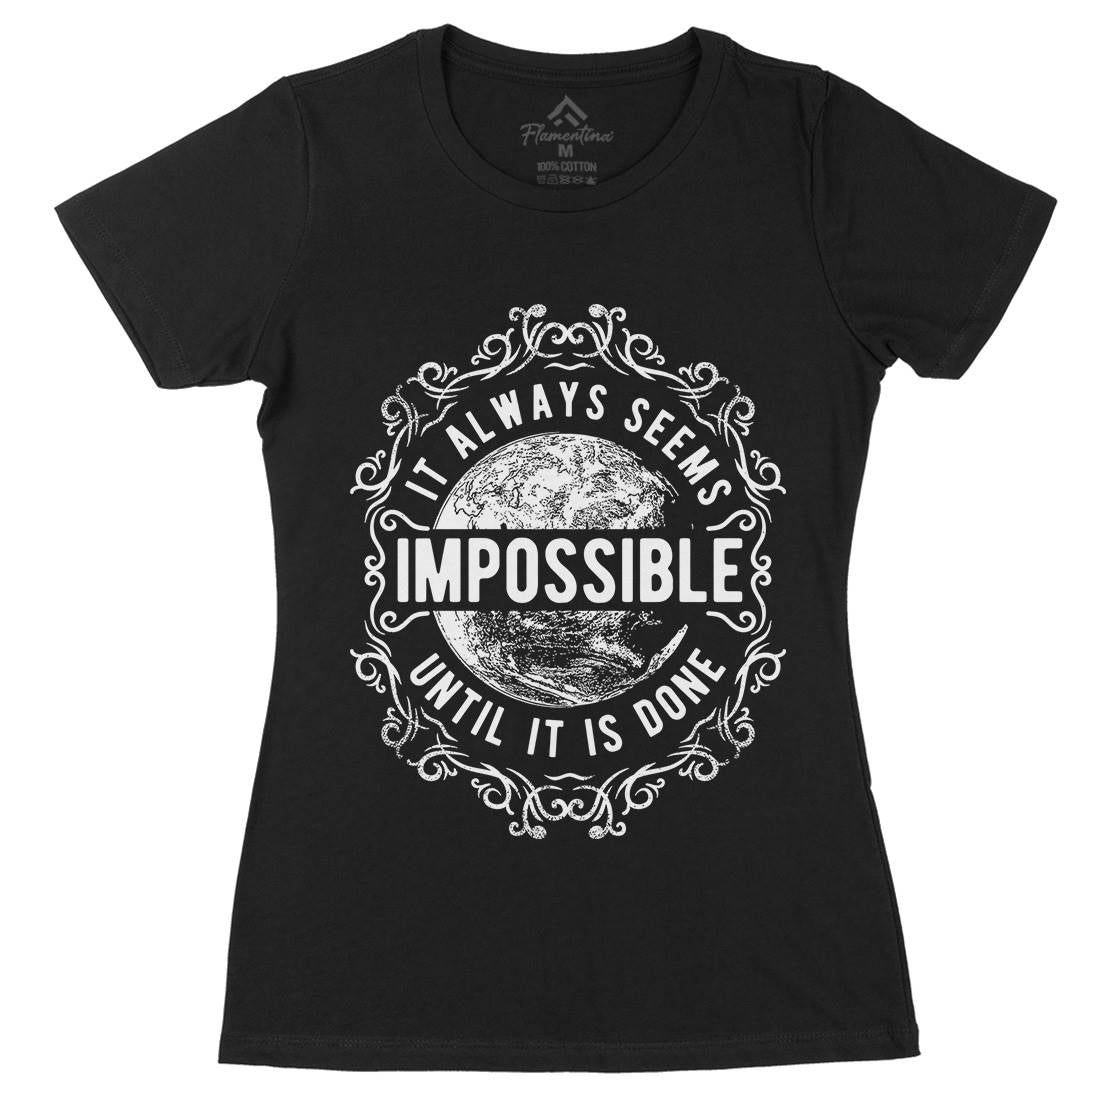 Always Seems Impossible Womens Organic Crew Neck T-Shirt Quotes C900